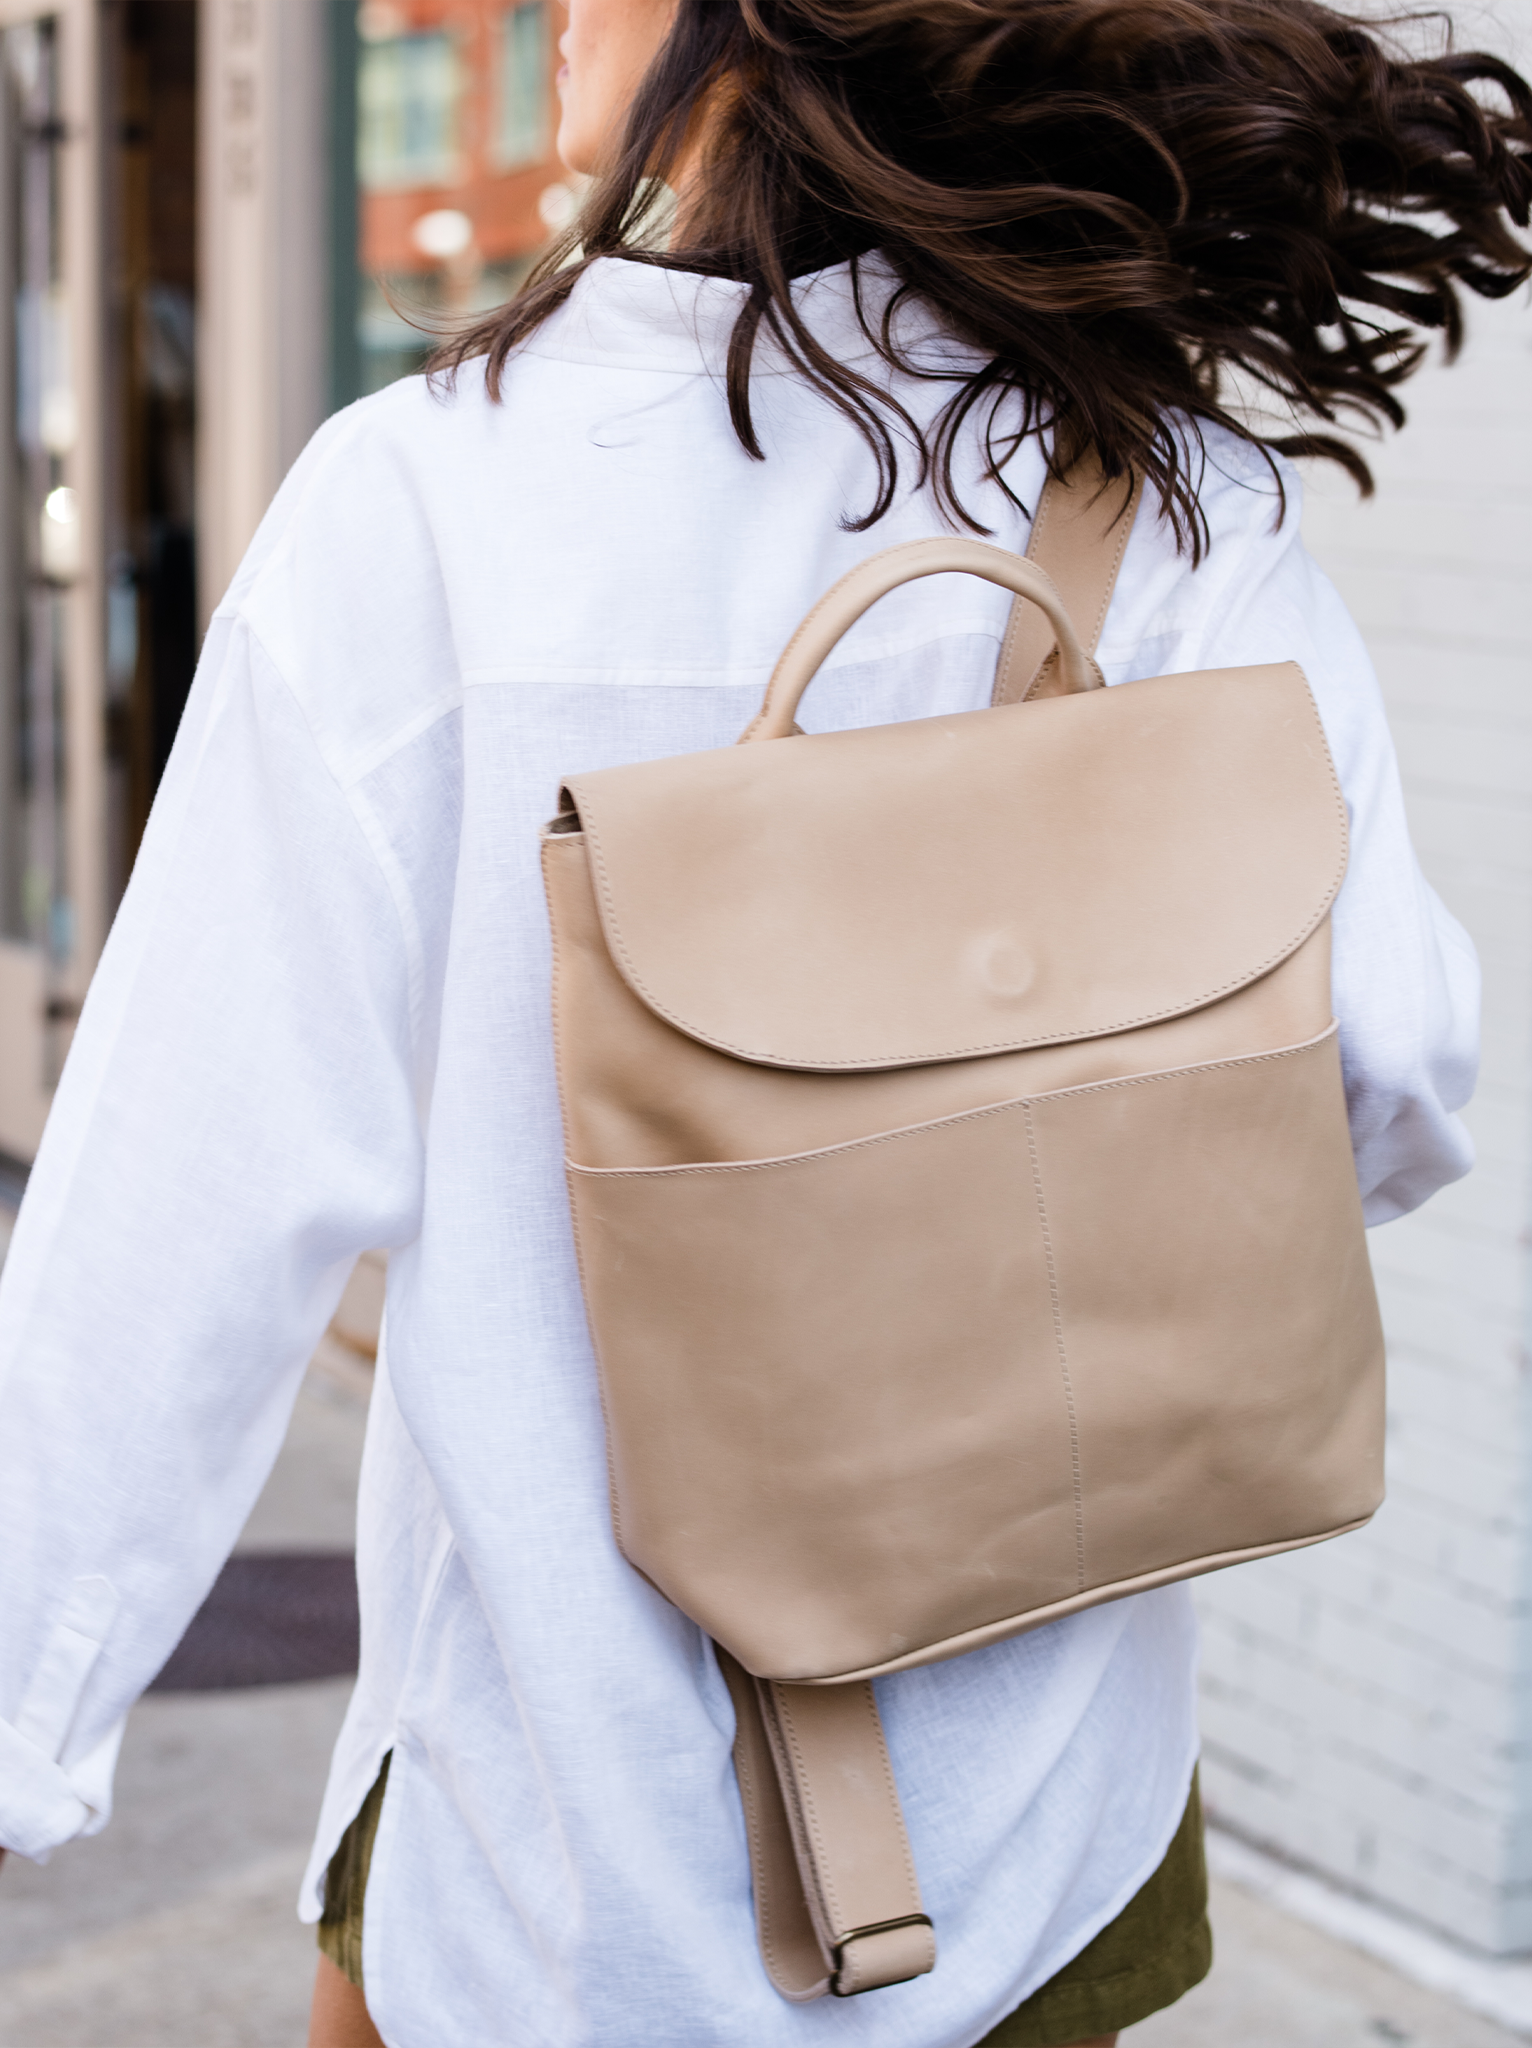 Woman with a beige backpack on a city street.